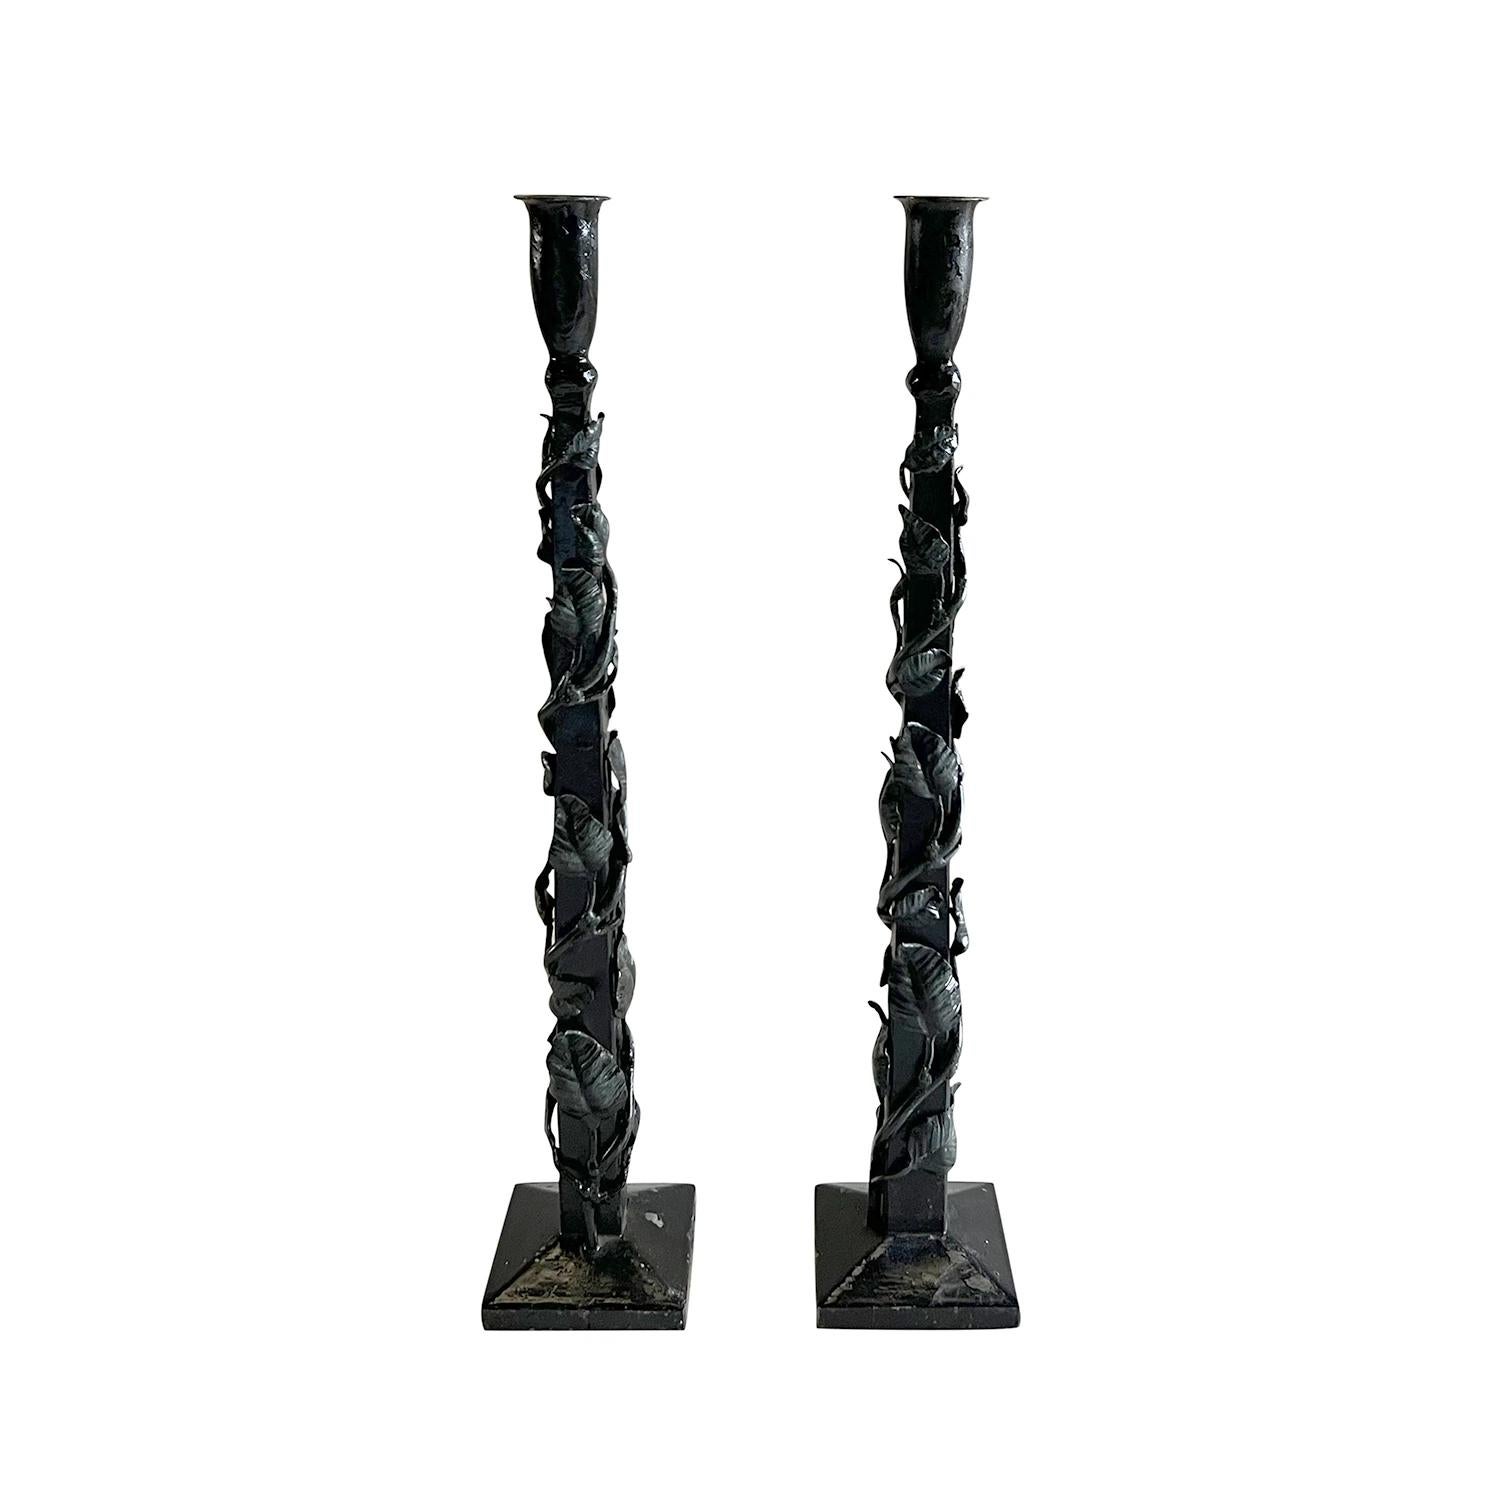 20th Century French Pair of Brutalist Candle Holders, Wrought Iron Sticks In Good Condition For Sale In West Palm Beach, FL